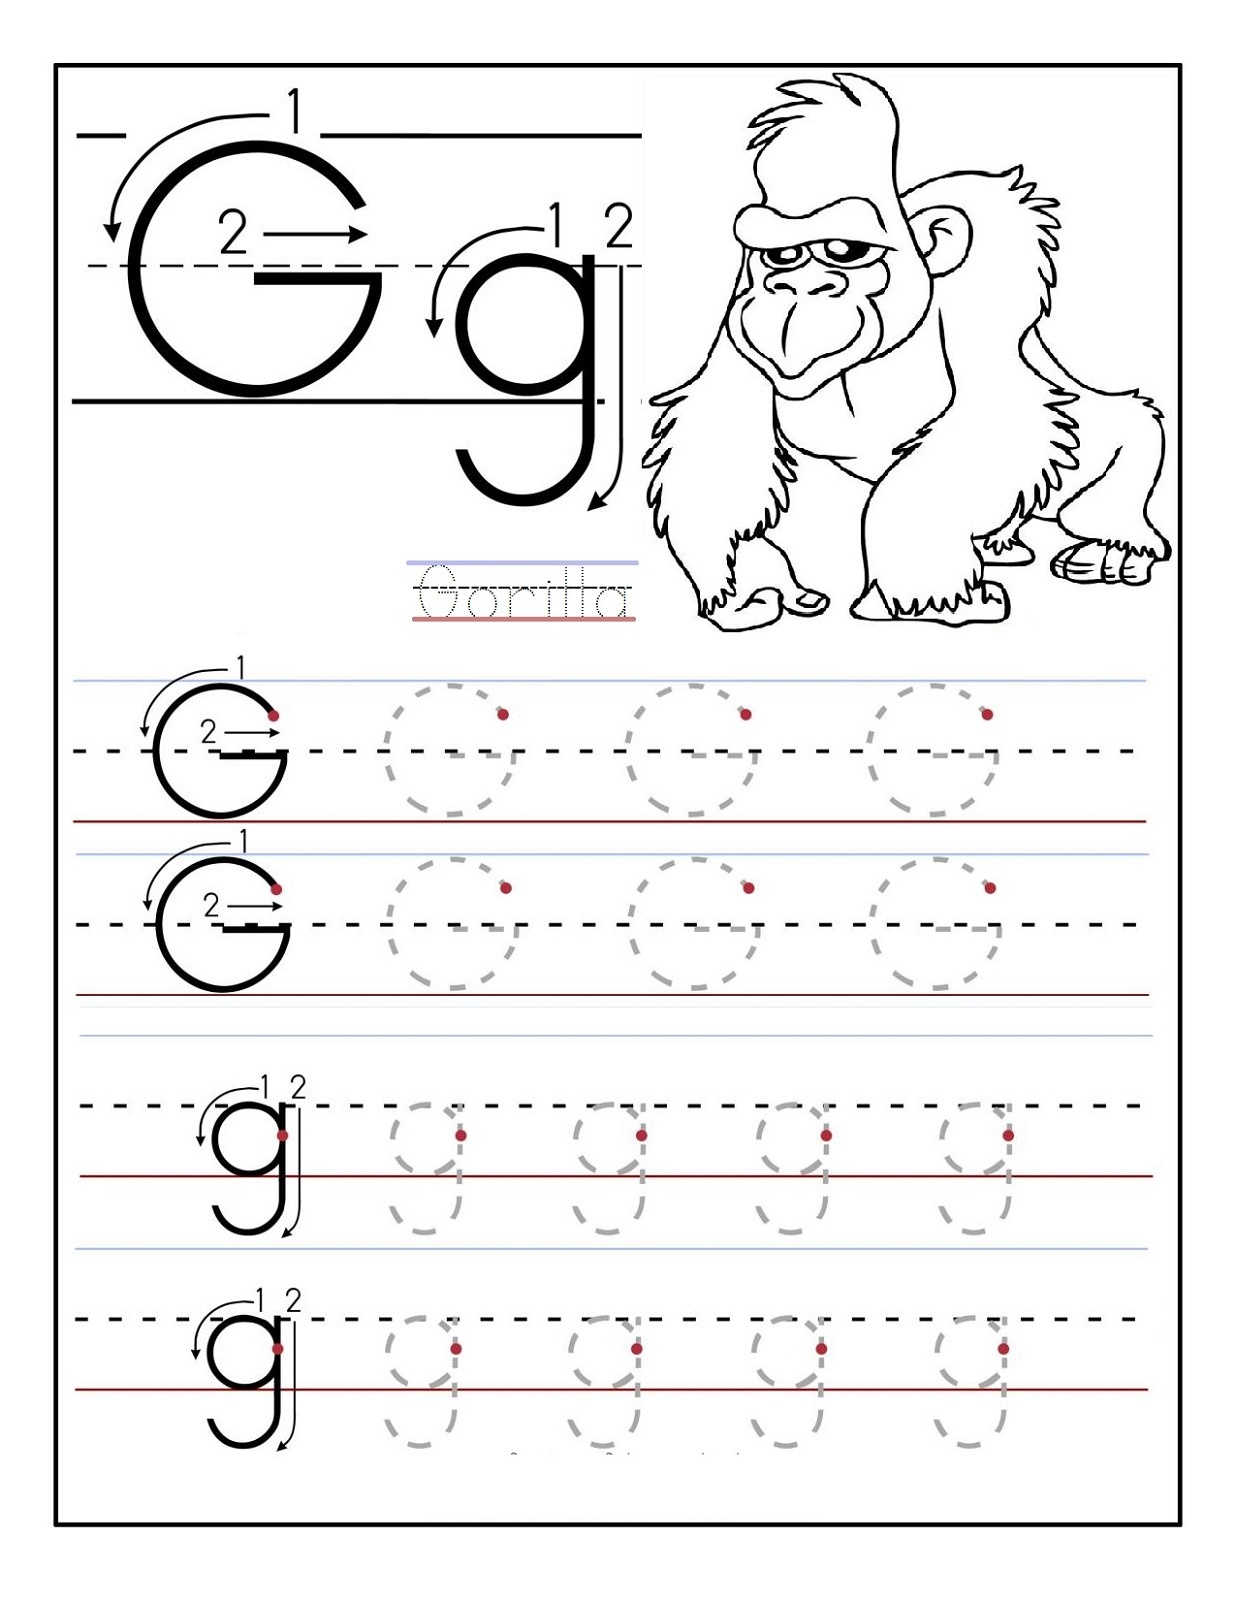 Free Printable Activities For Kids | Educative Printable - Free Printable Activities For Kids